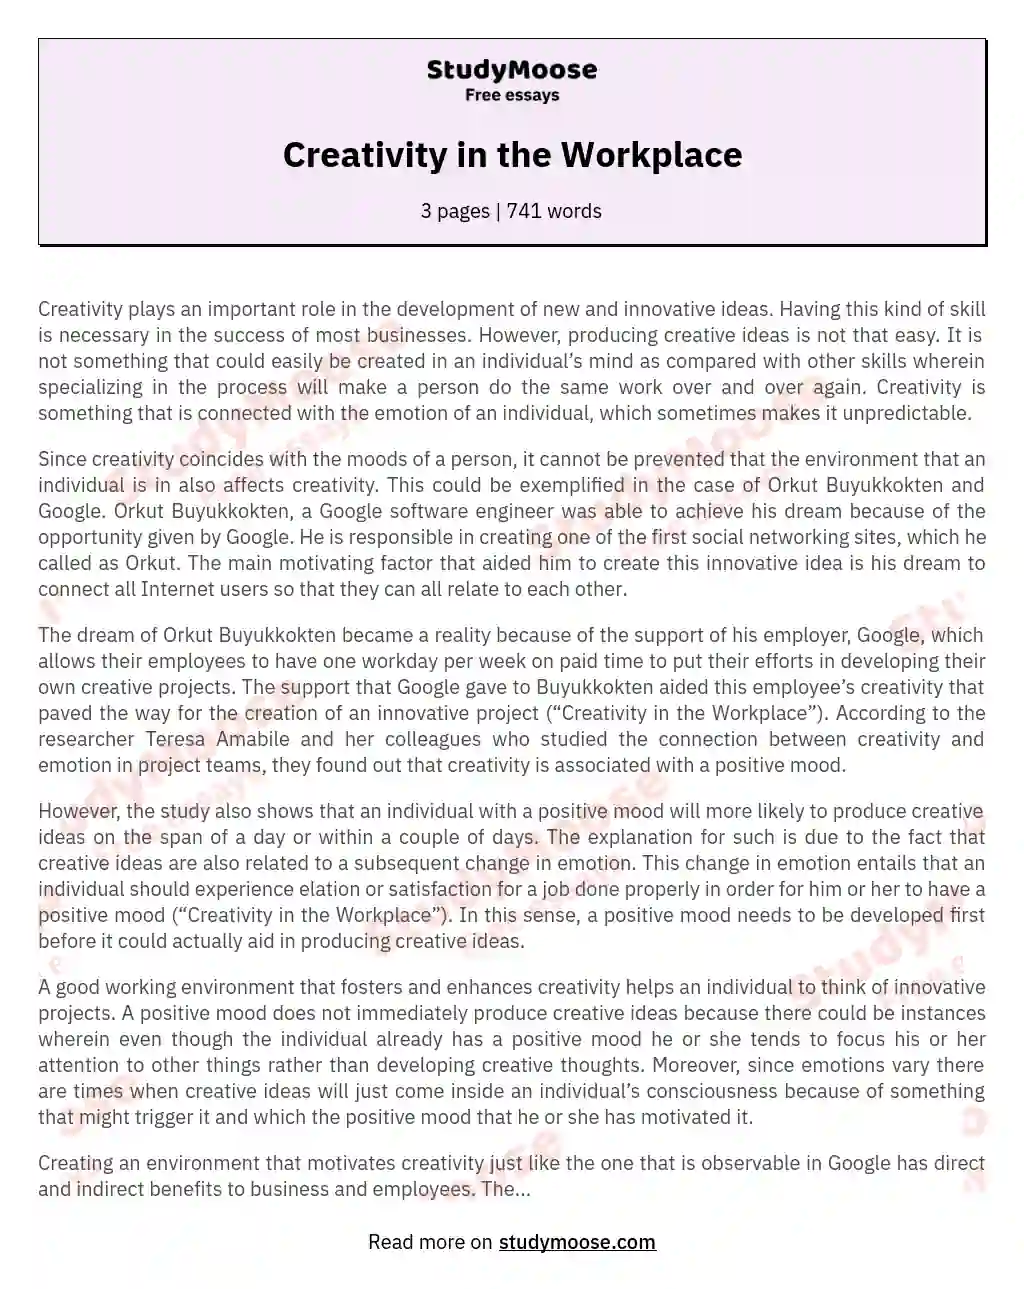 Creativity in the Workplace